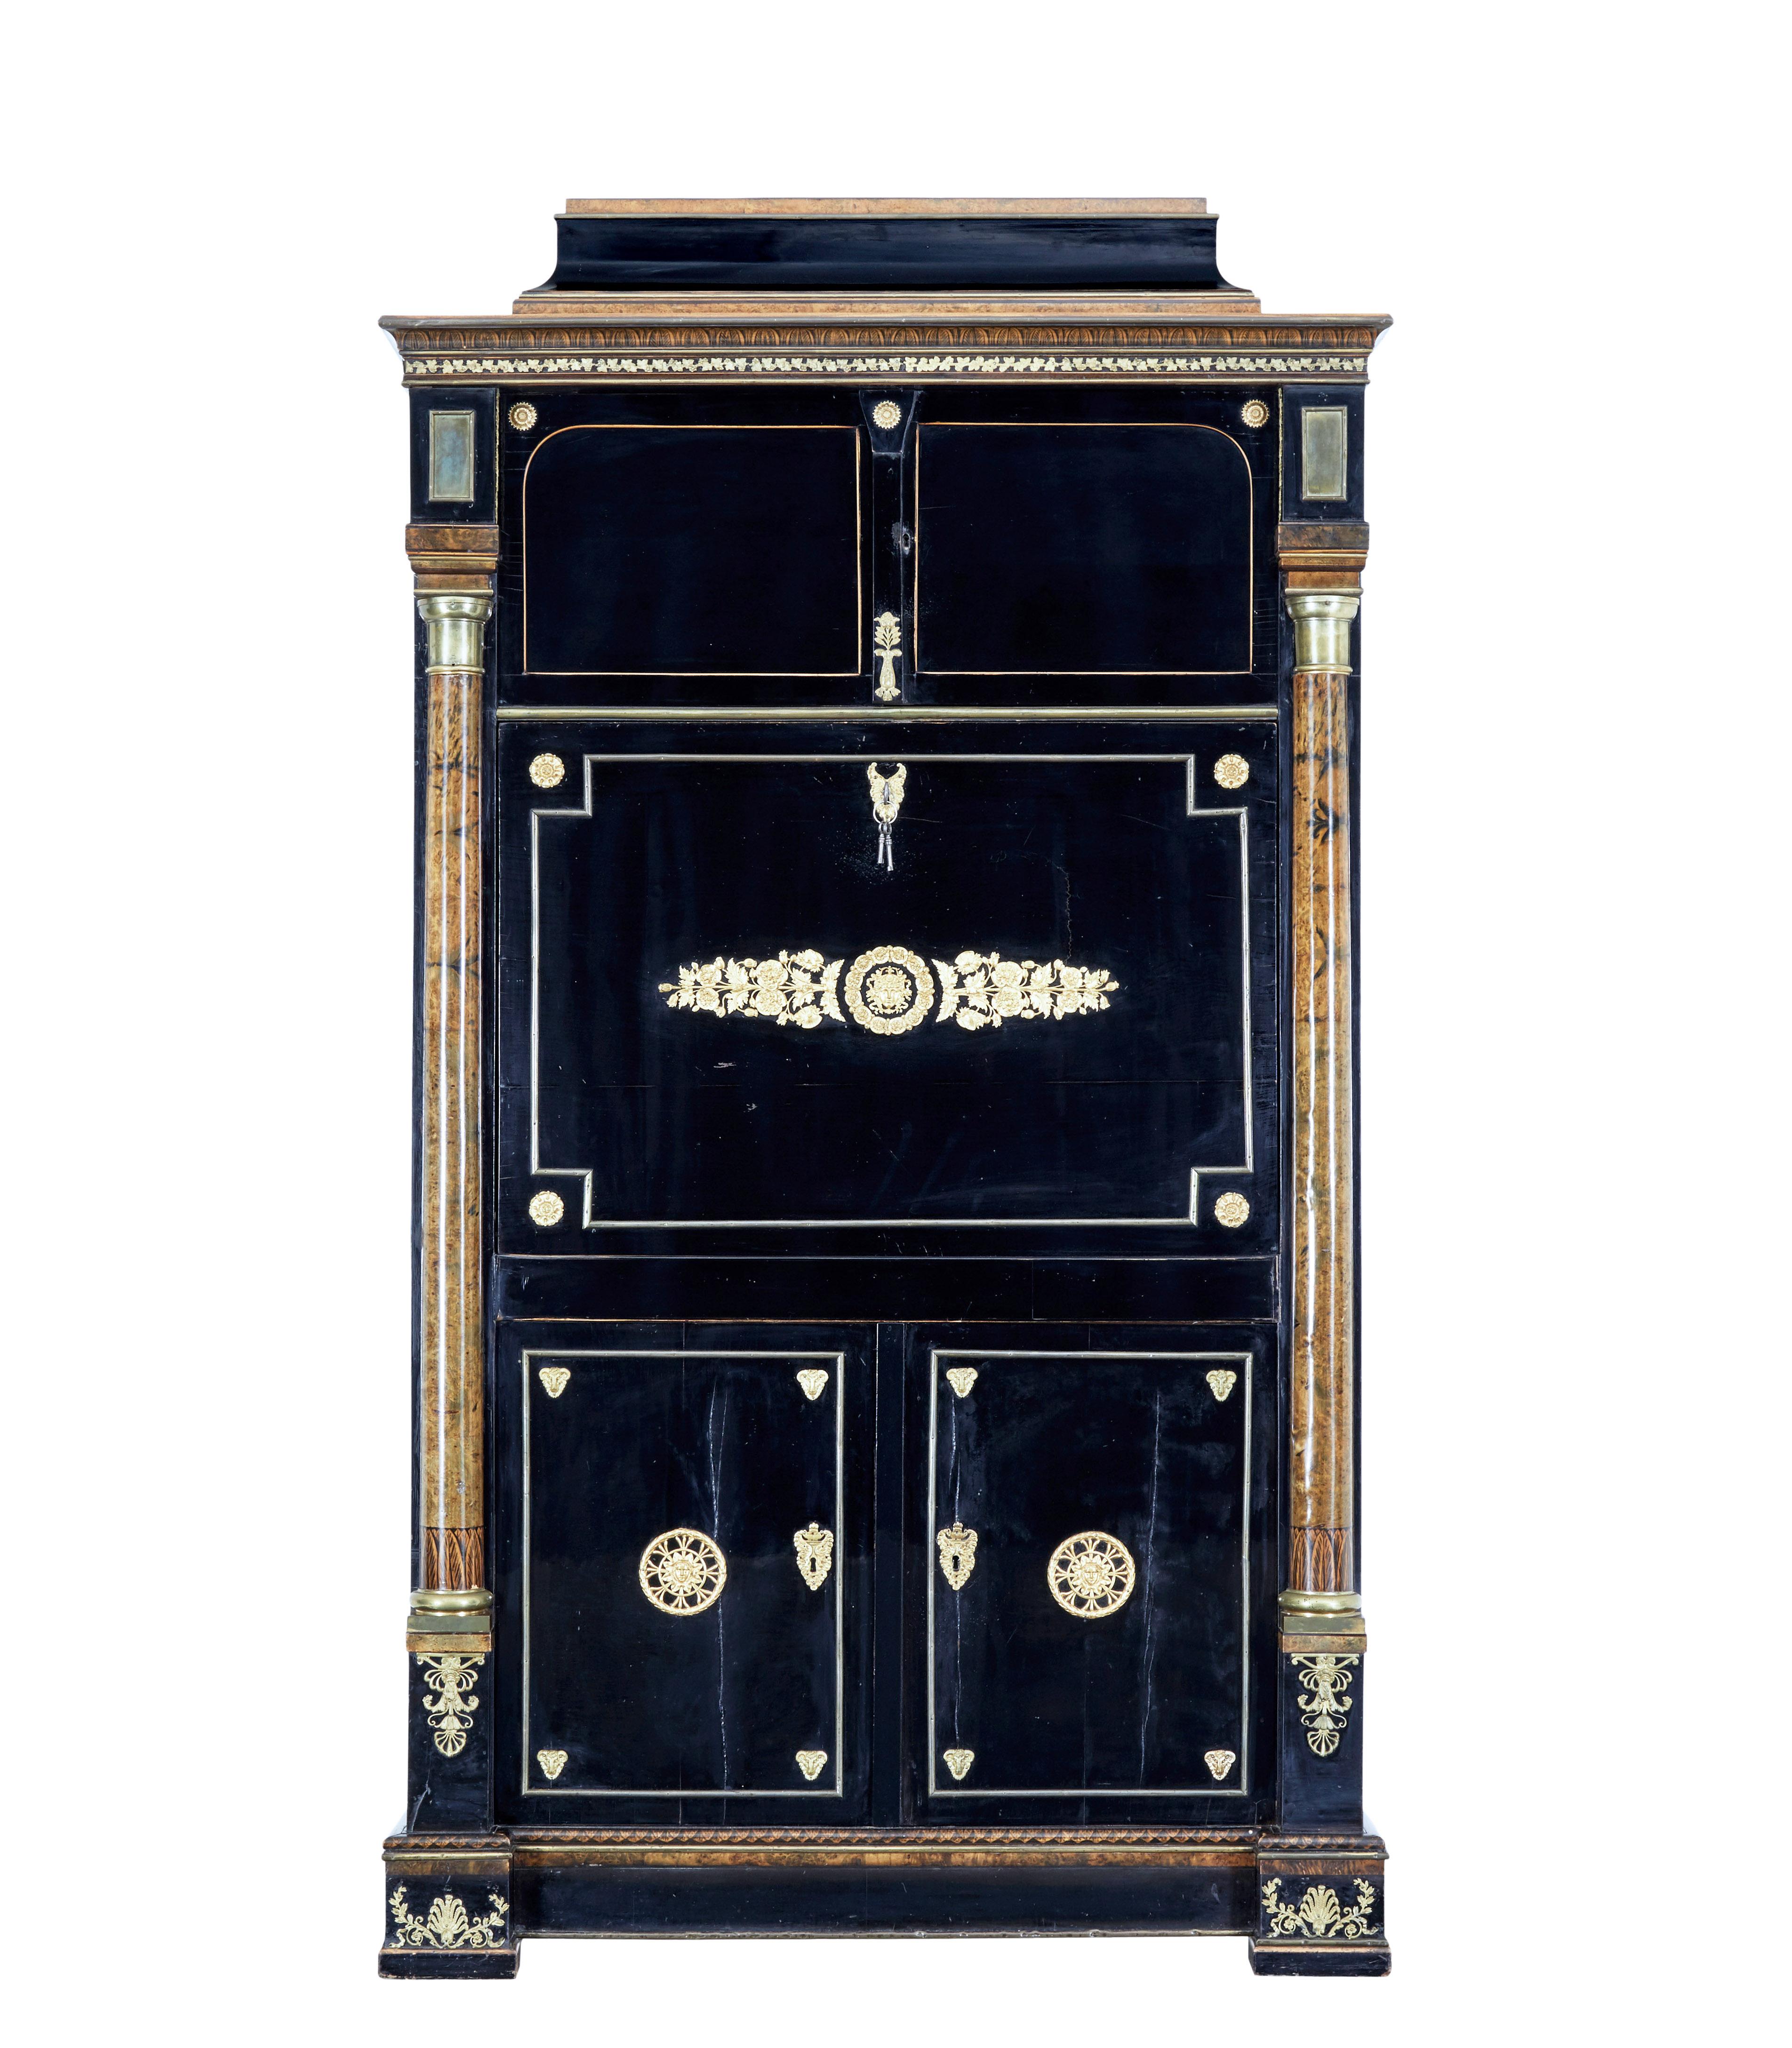 Early 19th century Biedermeier ebonised birch escritoire circa 1820.

We are pleased to offer this stunning Austrian biedermeier period escritoire, offered in original condition.

Made as 1 piece, beautifully ebonised, with contrasting interior